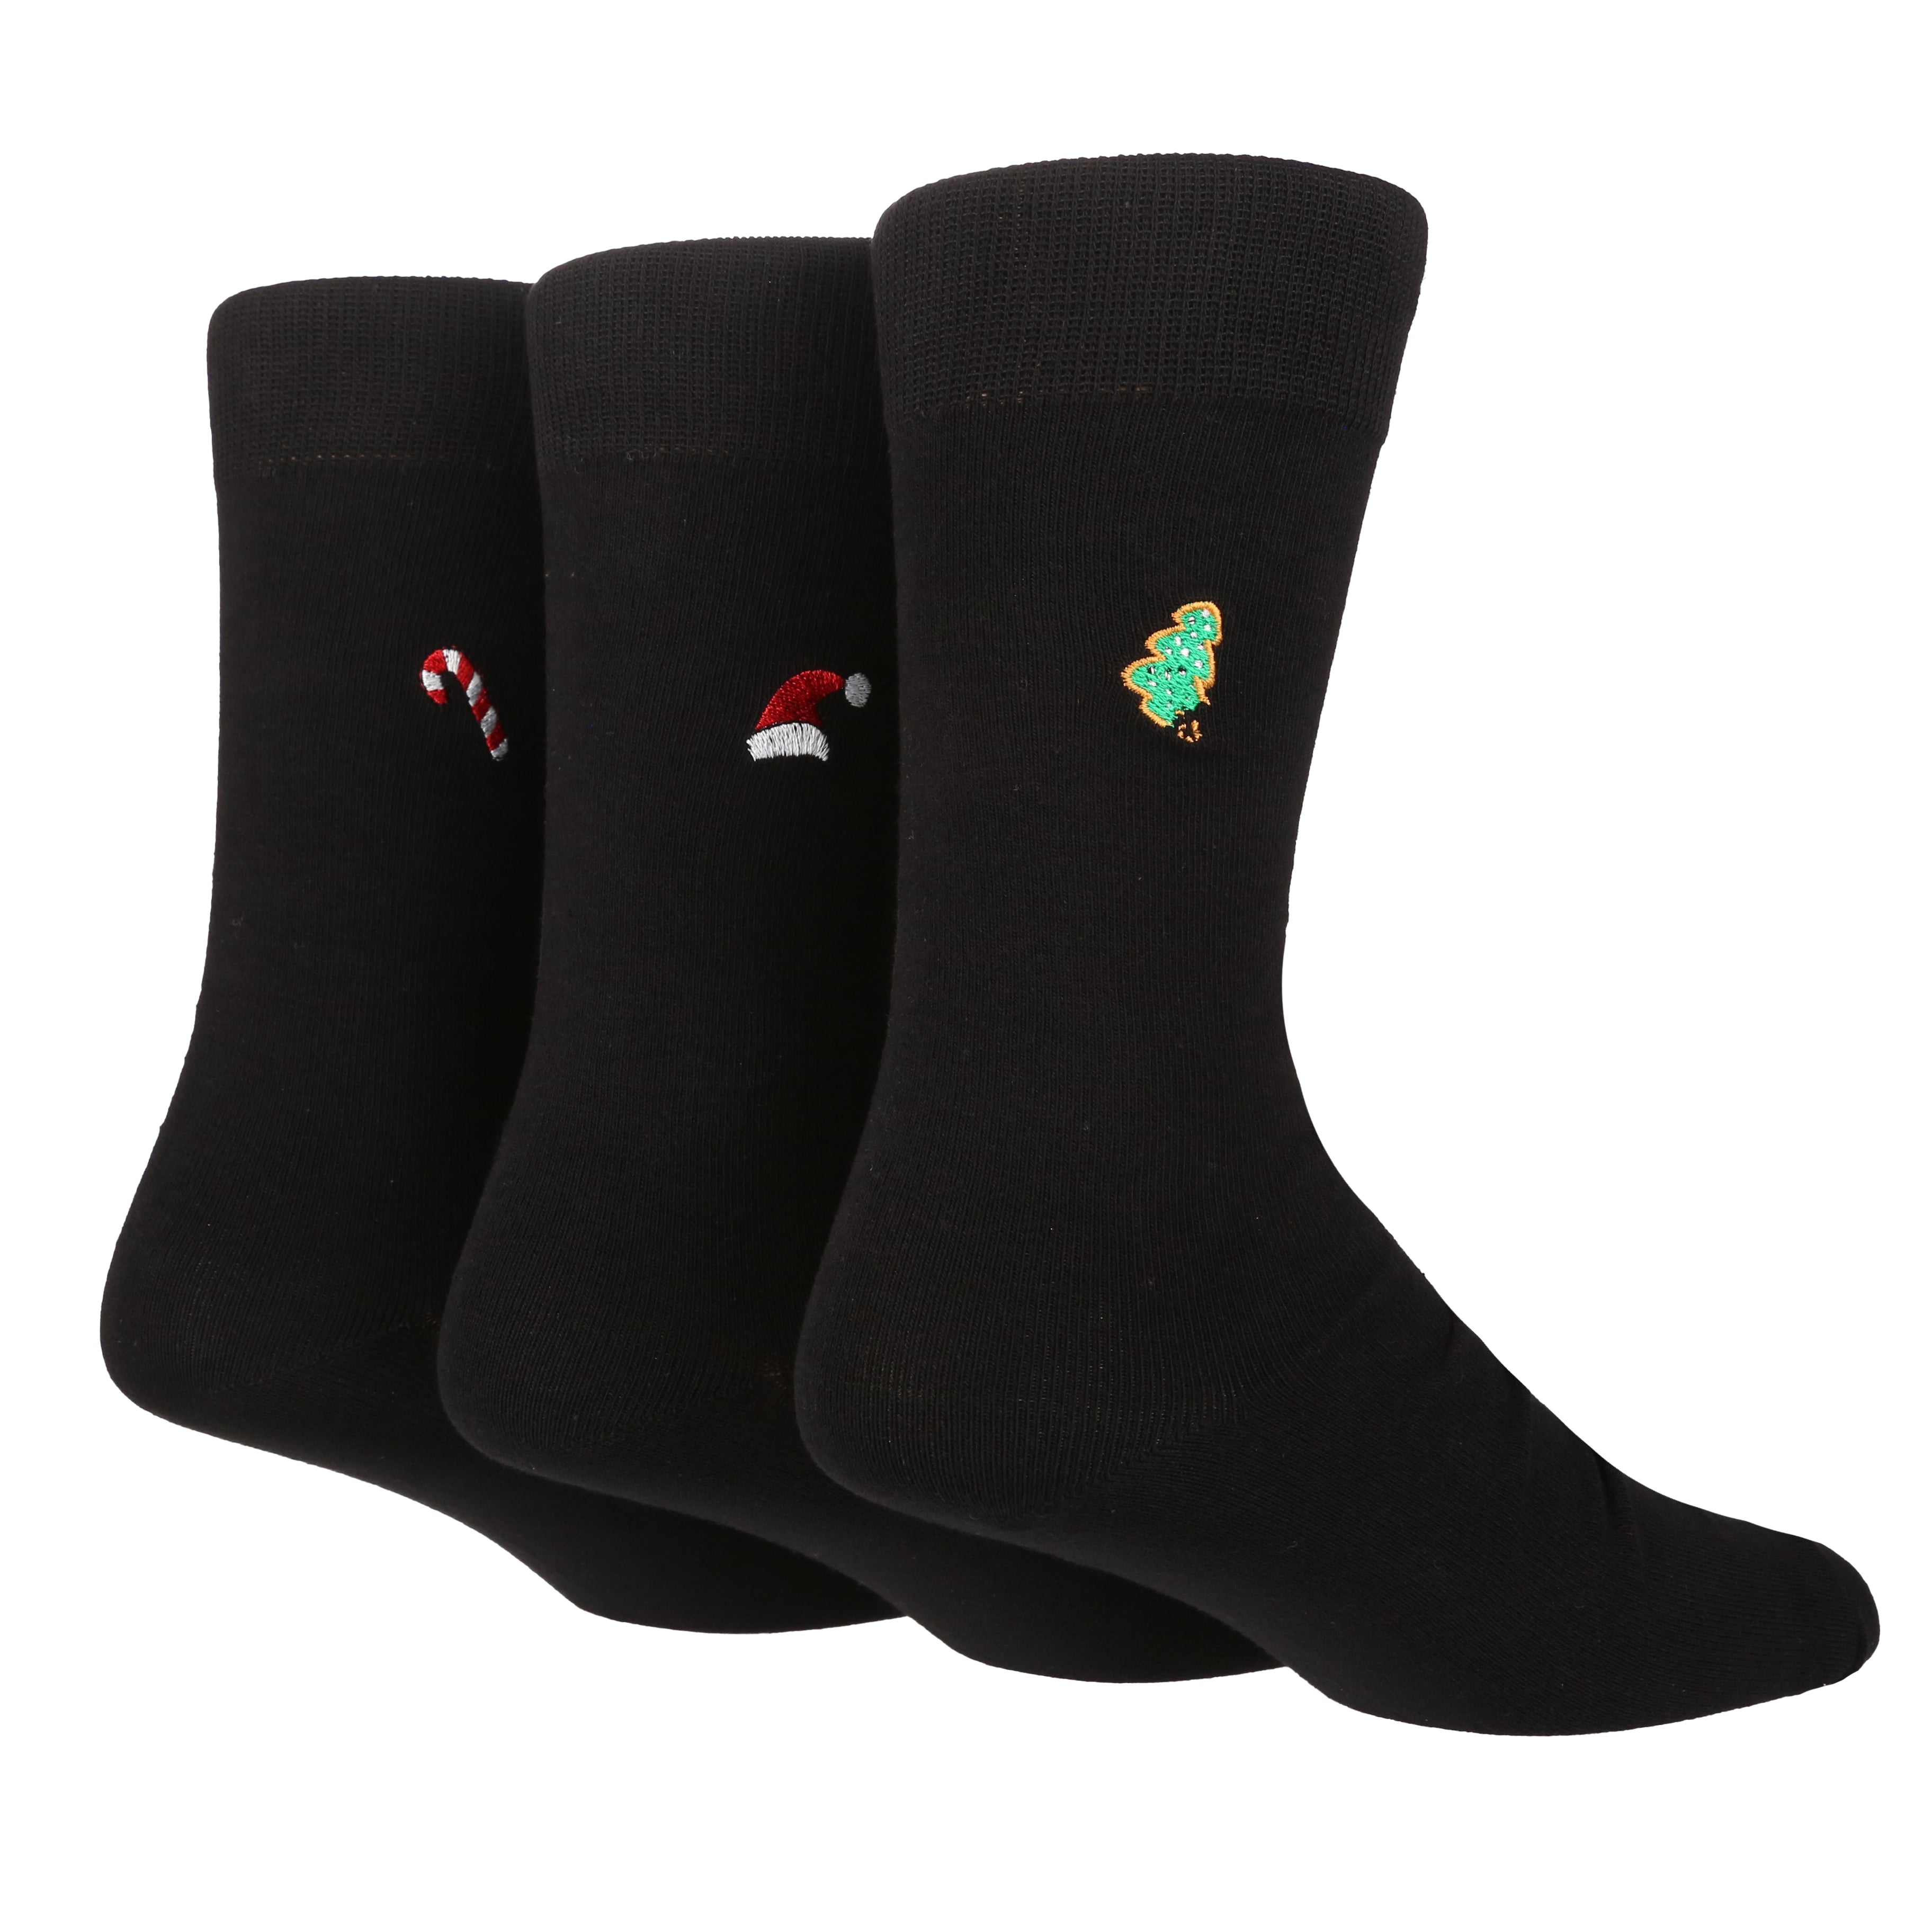 WILDFEET 3pk Embroided Christmas Cotton Novelty Crew - Mens 7-11